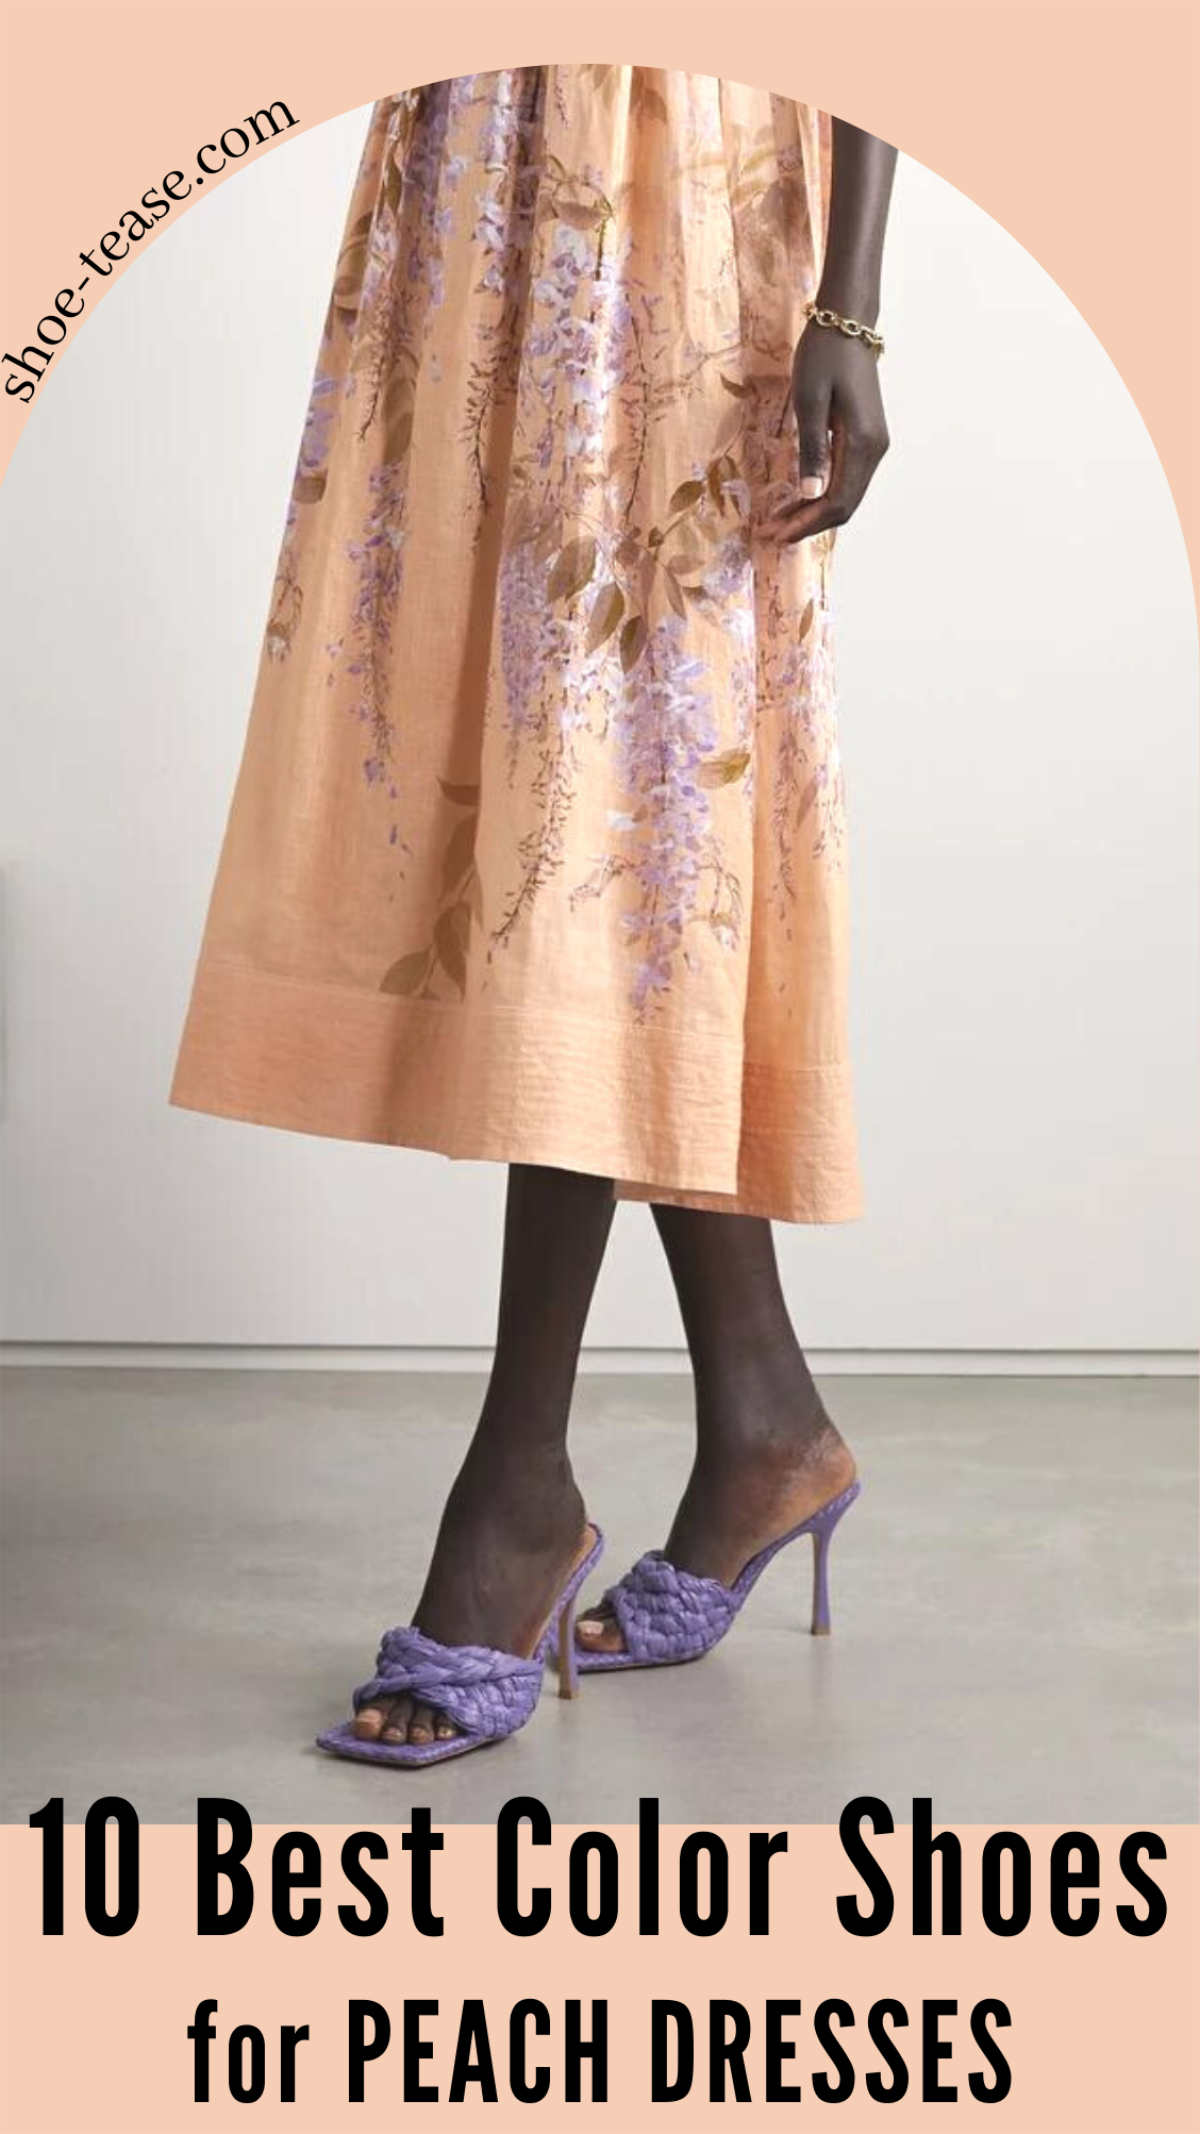 Lady wearing peach dress with purple shoes.